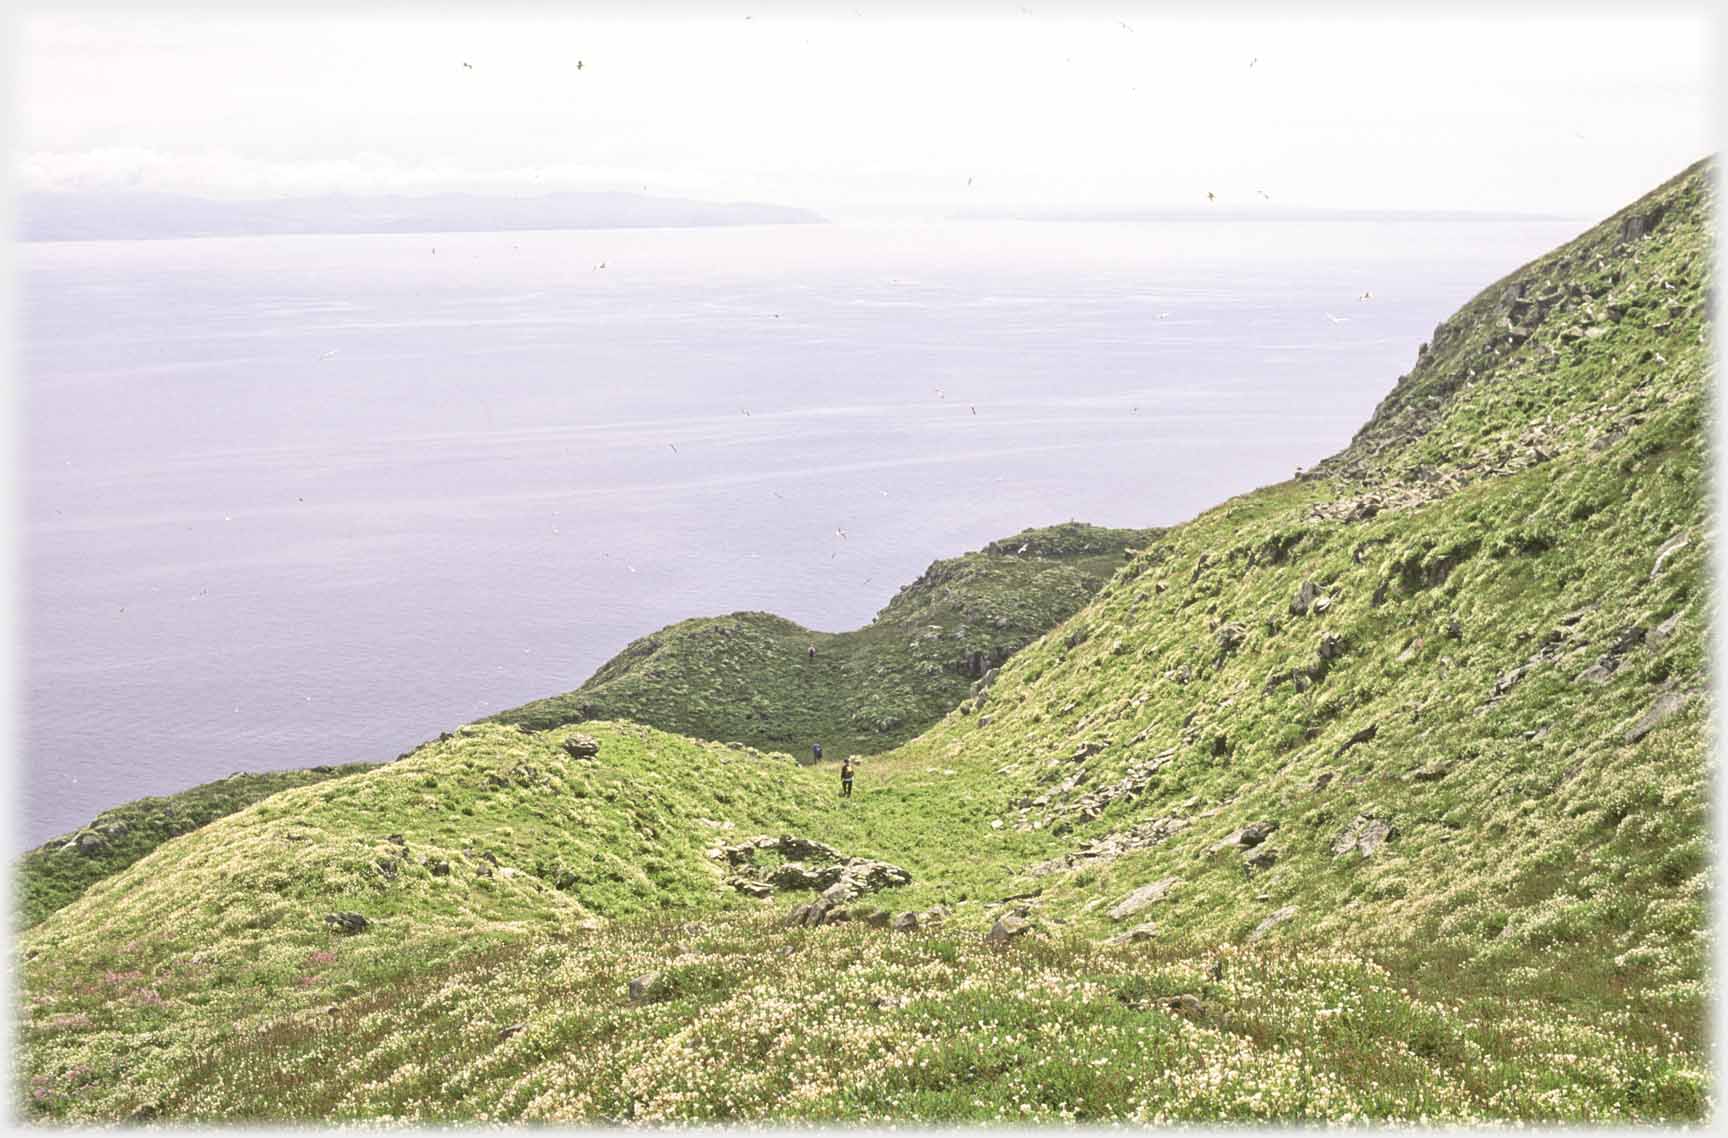 Path leading down hill with figure, distant land across sea.